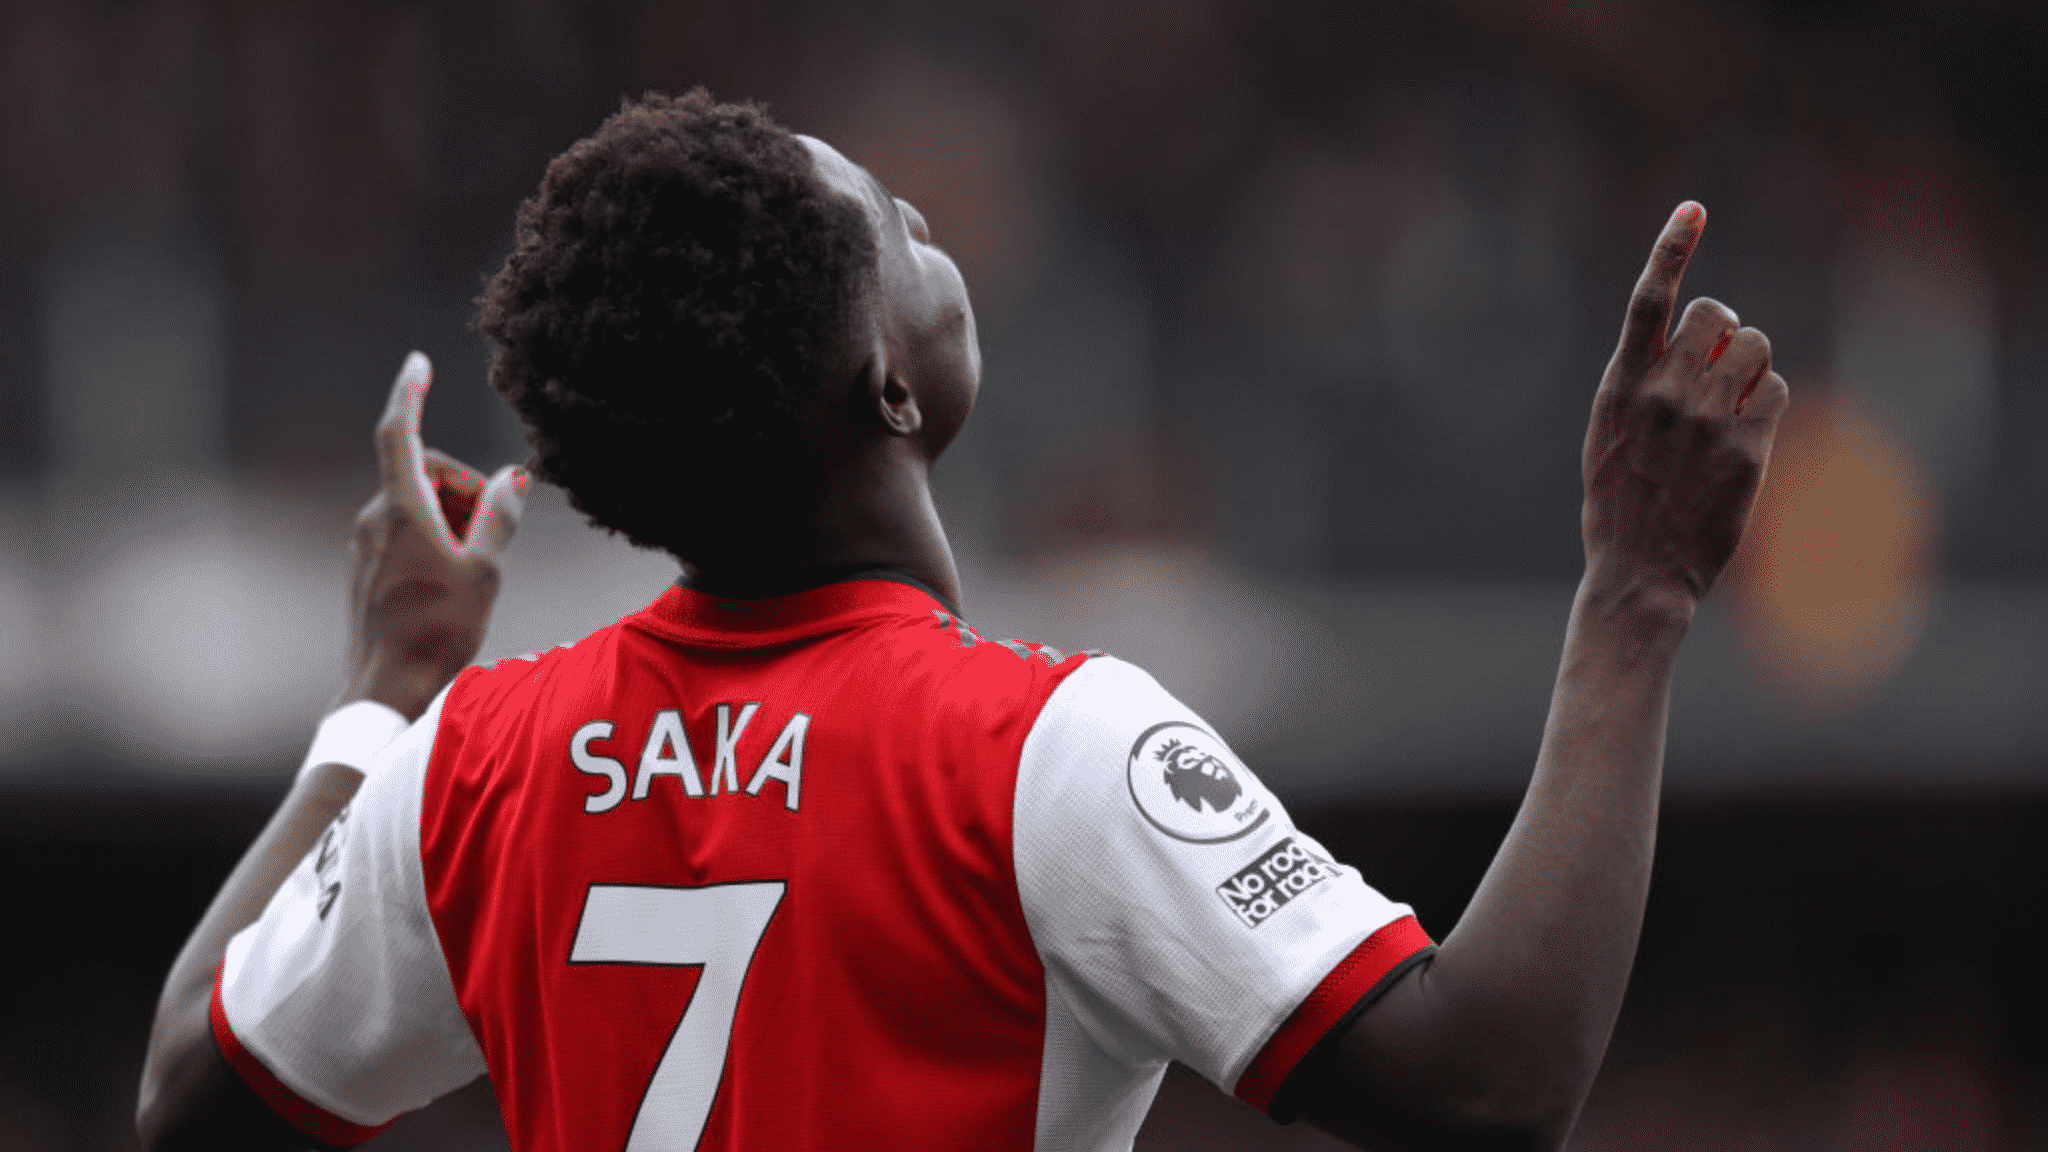 Saka receives praise from manager and teammates after brilliant showing against Watford, My Football Facts